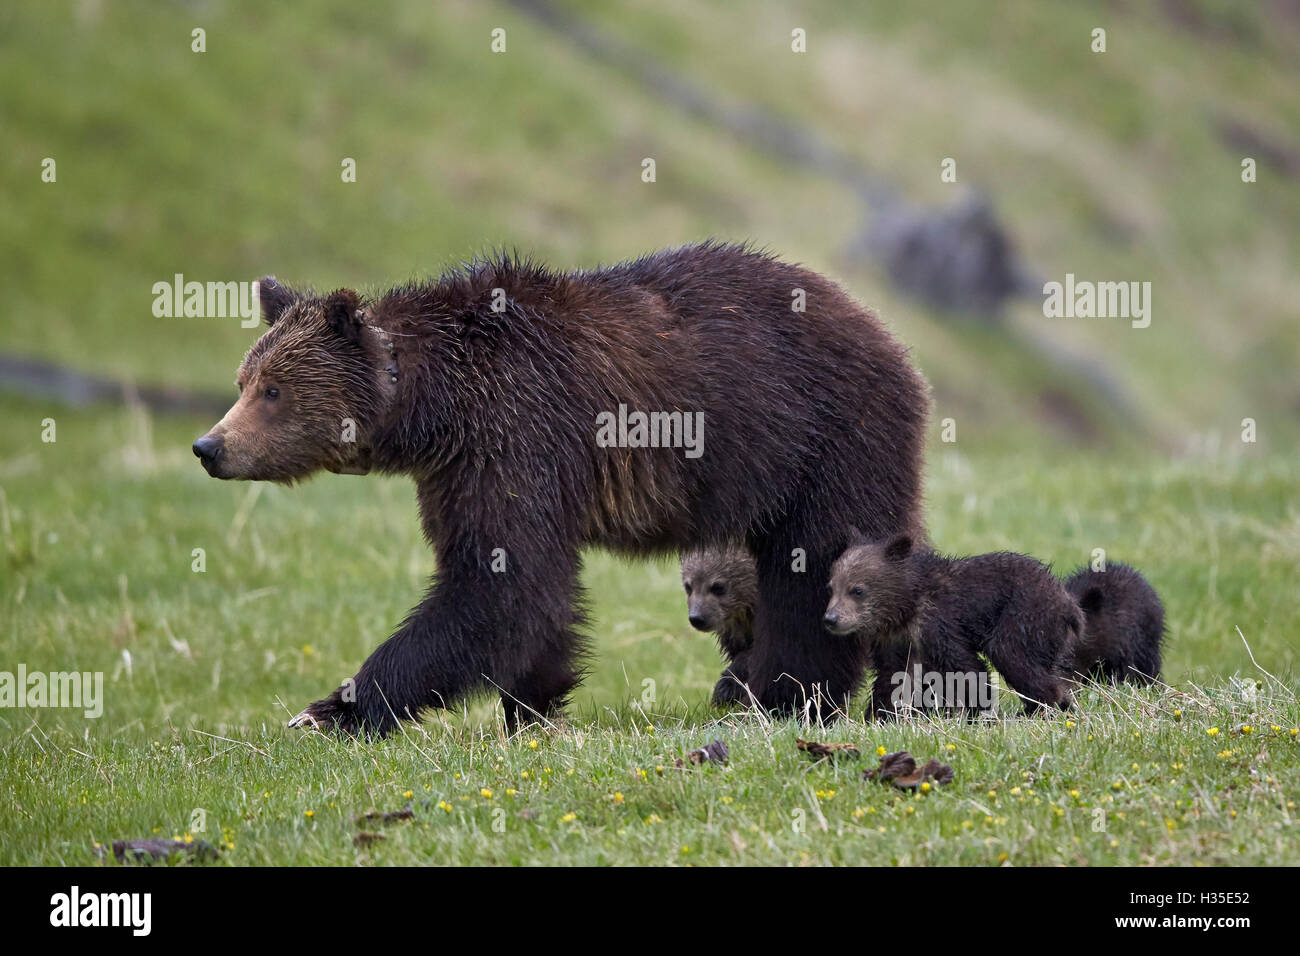 Grizzly bear (Ursus arctos horribilis) sow and three cubs of the year, Yellowstone National Park, Wyoming, USA Stock Photo